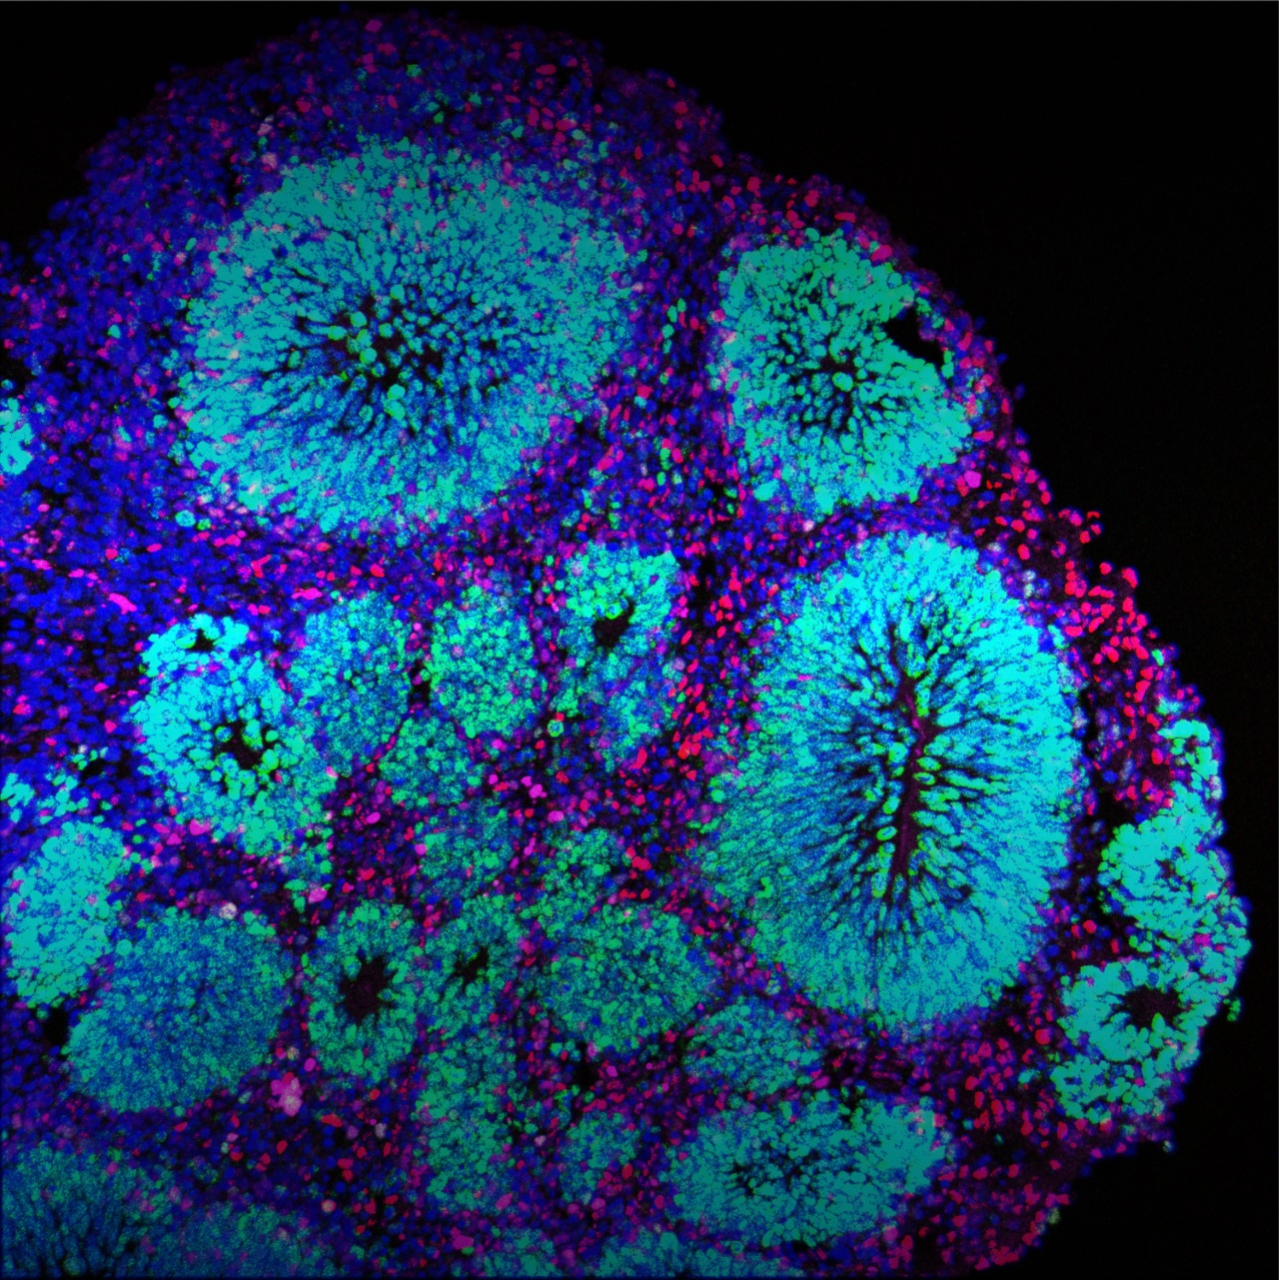 Fluorescent purple and turquoise dots make up the shape of the organoid against a black background.